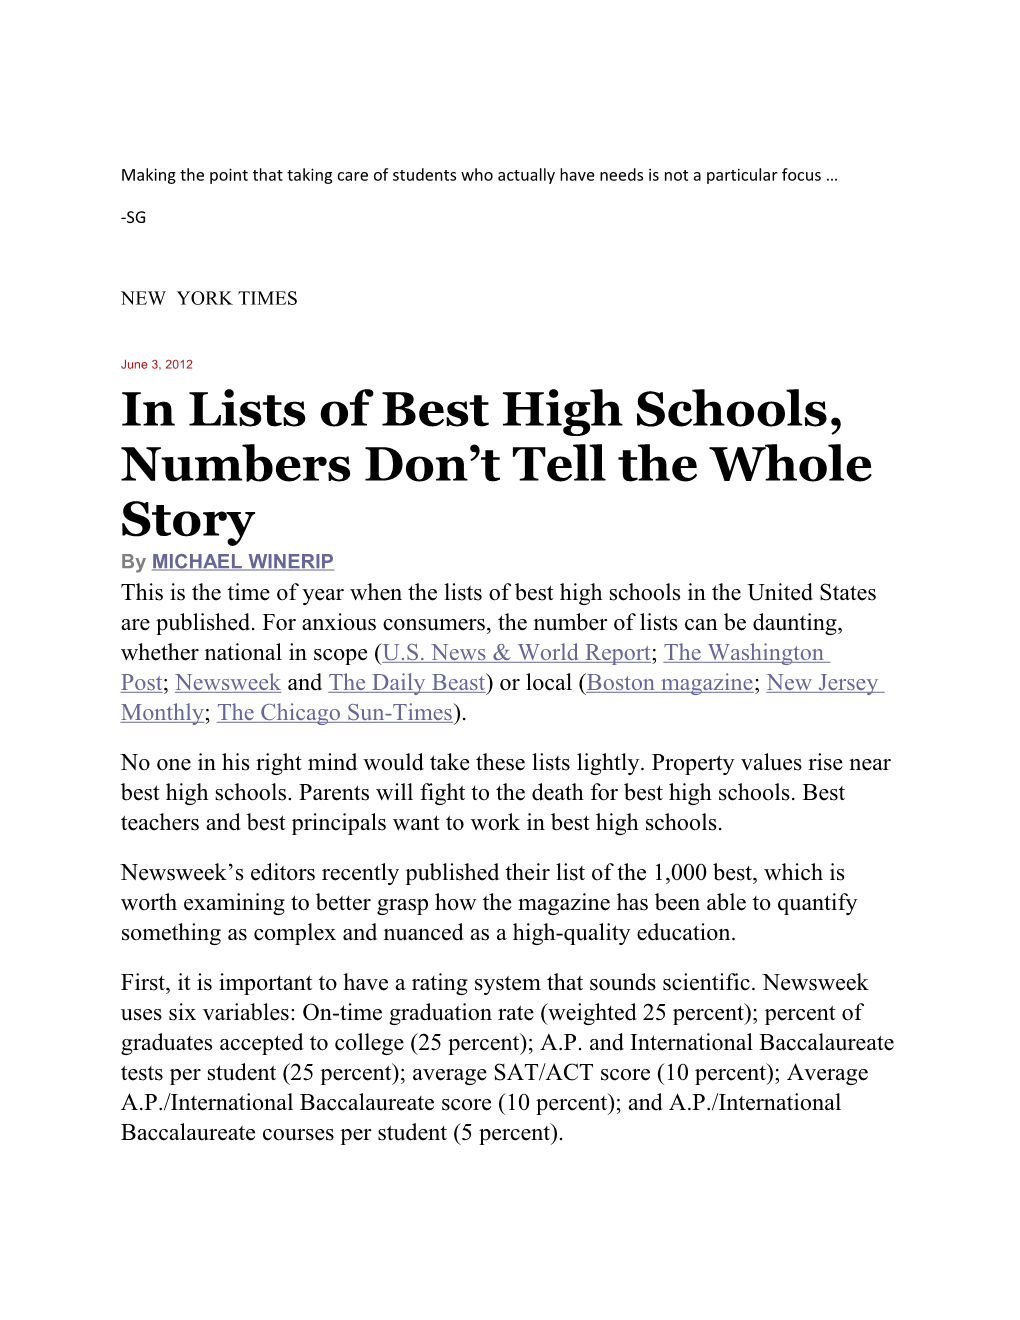 In Lists of Best High Schools, Numbers Don T Tell the Whole Story